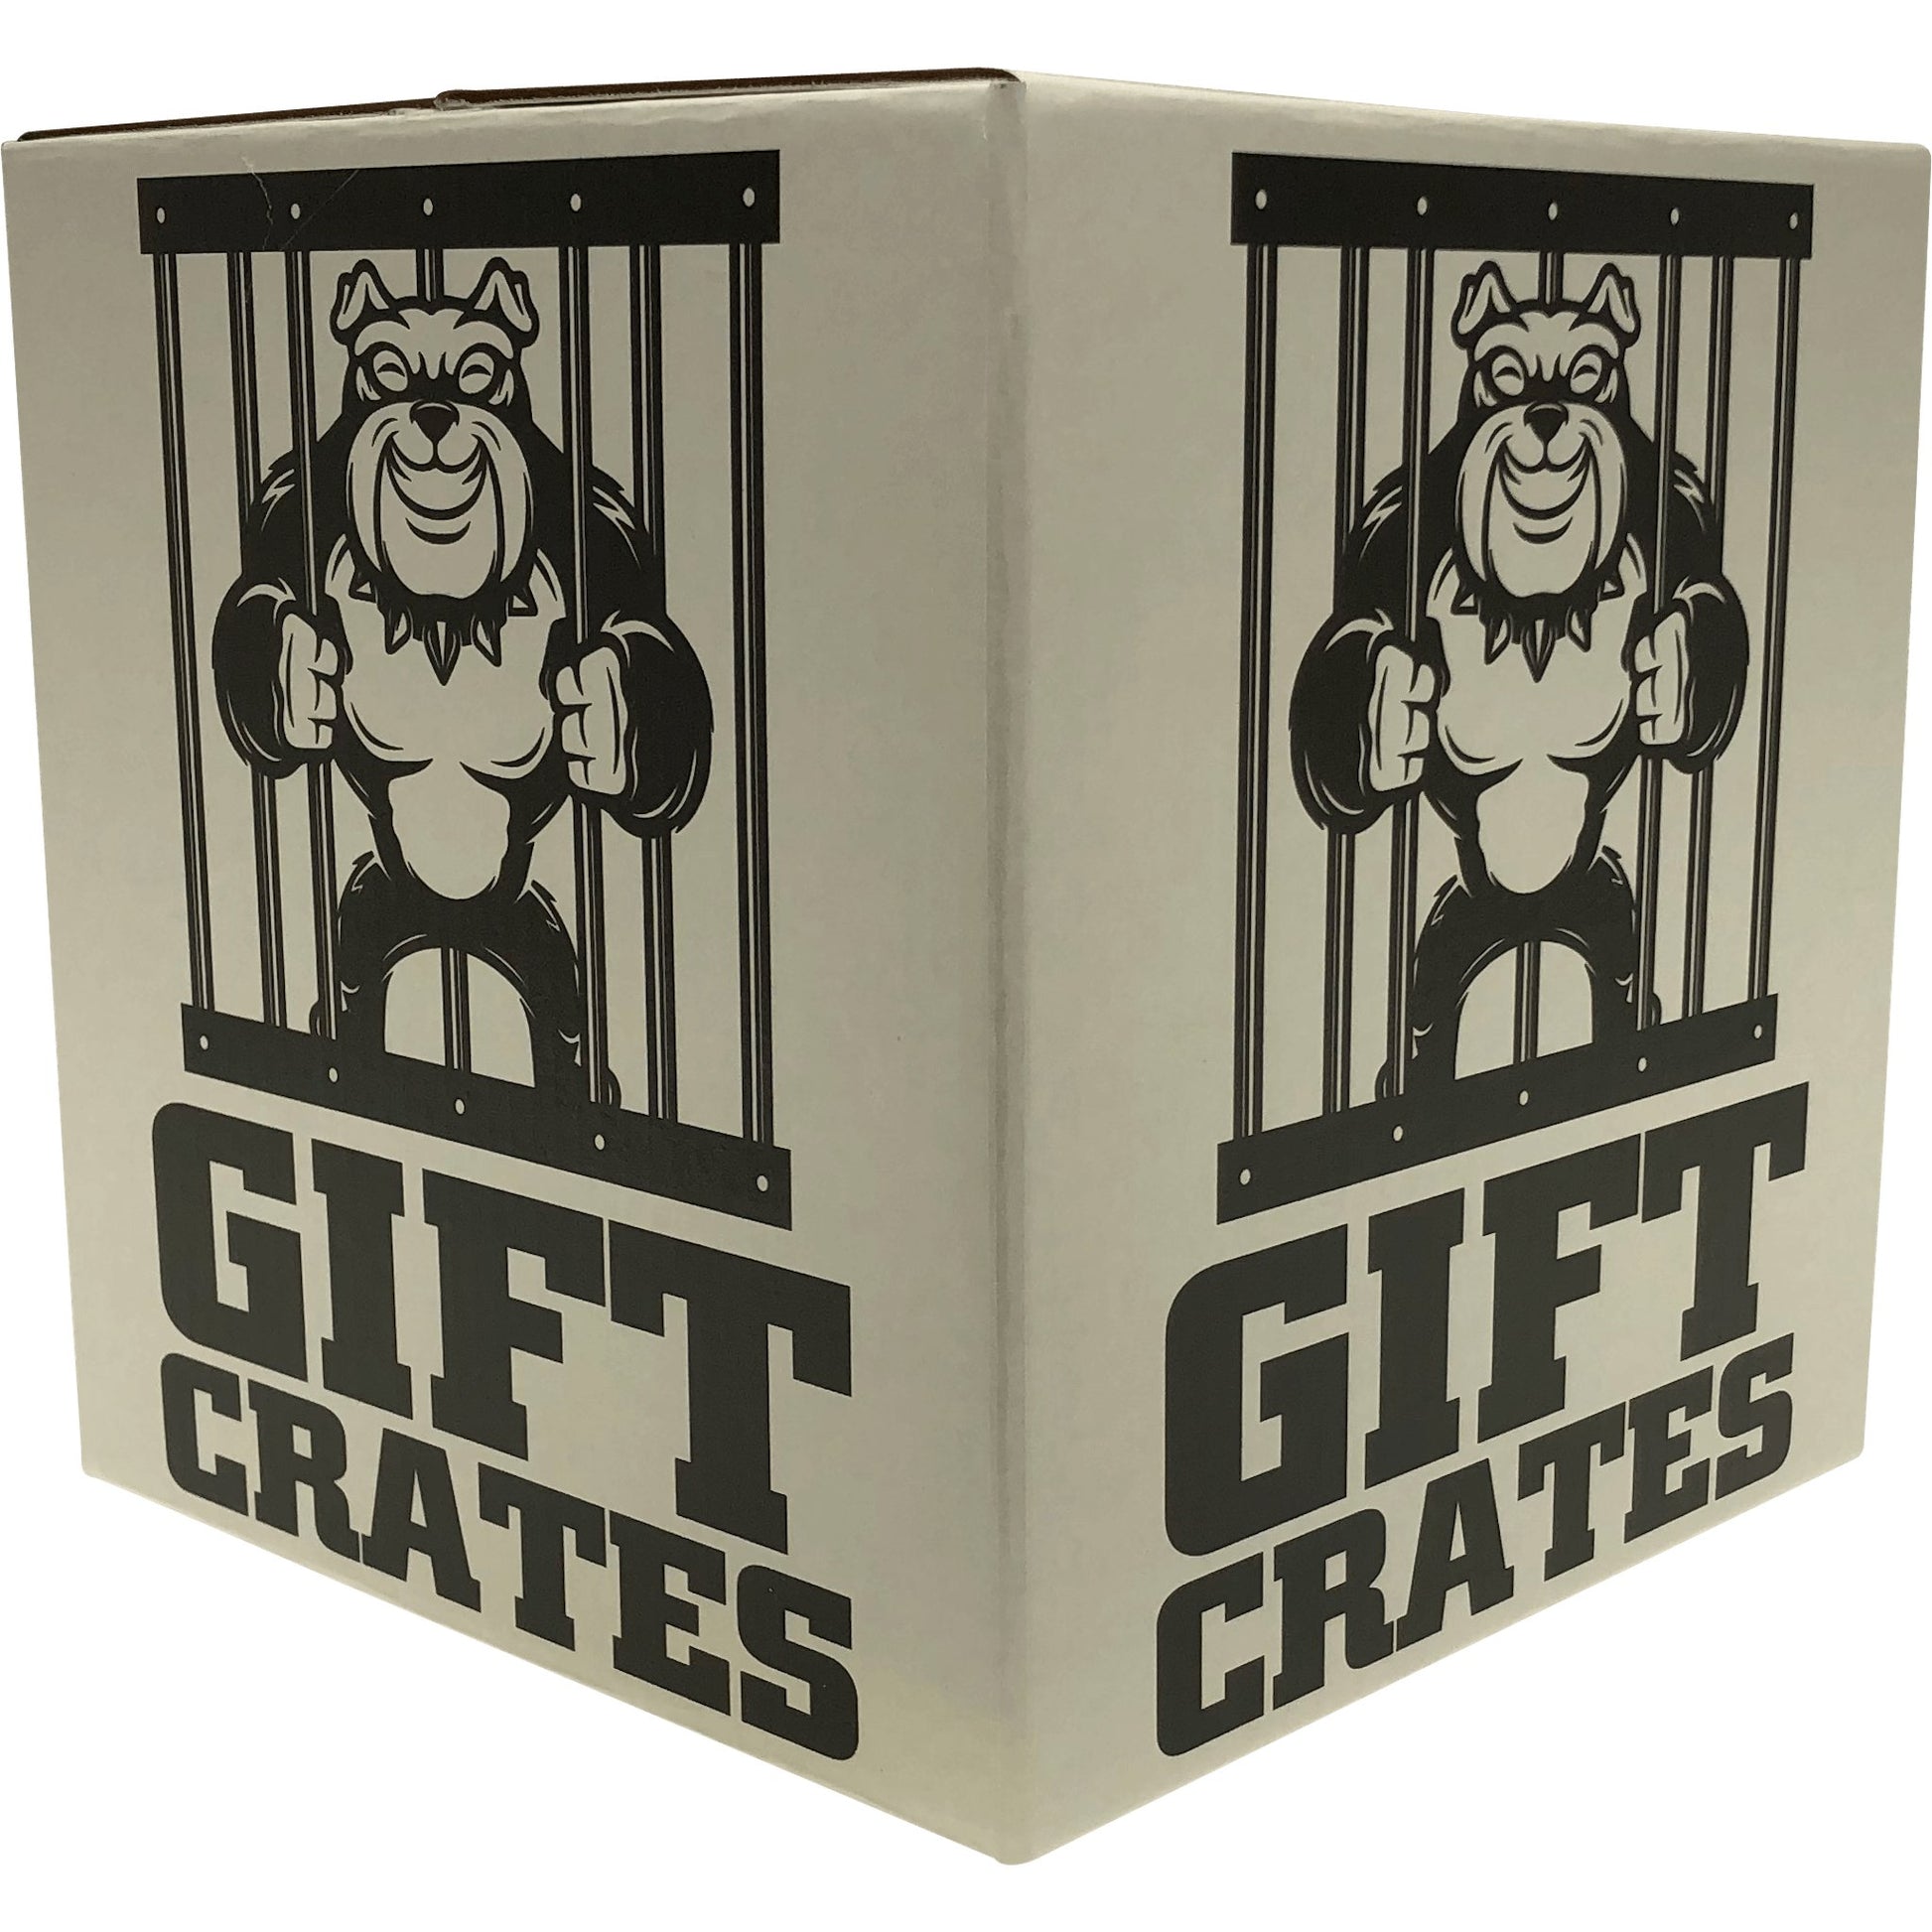 Game Day Crate - Gift Crates